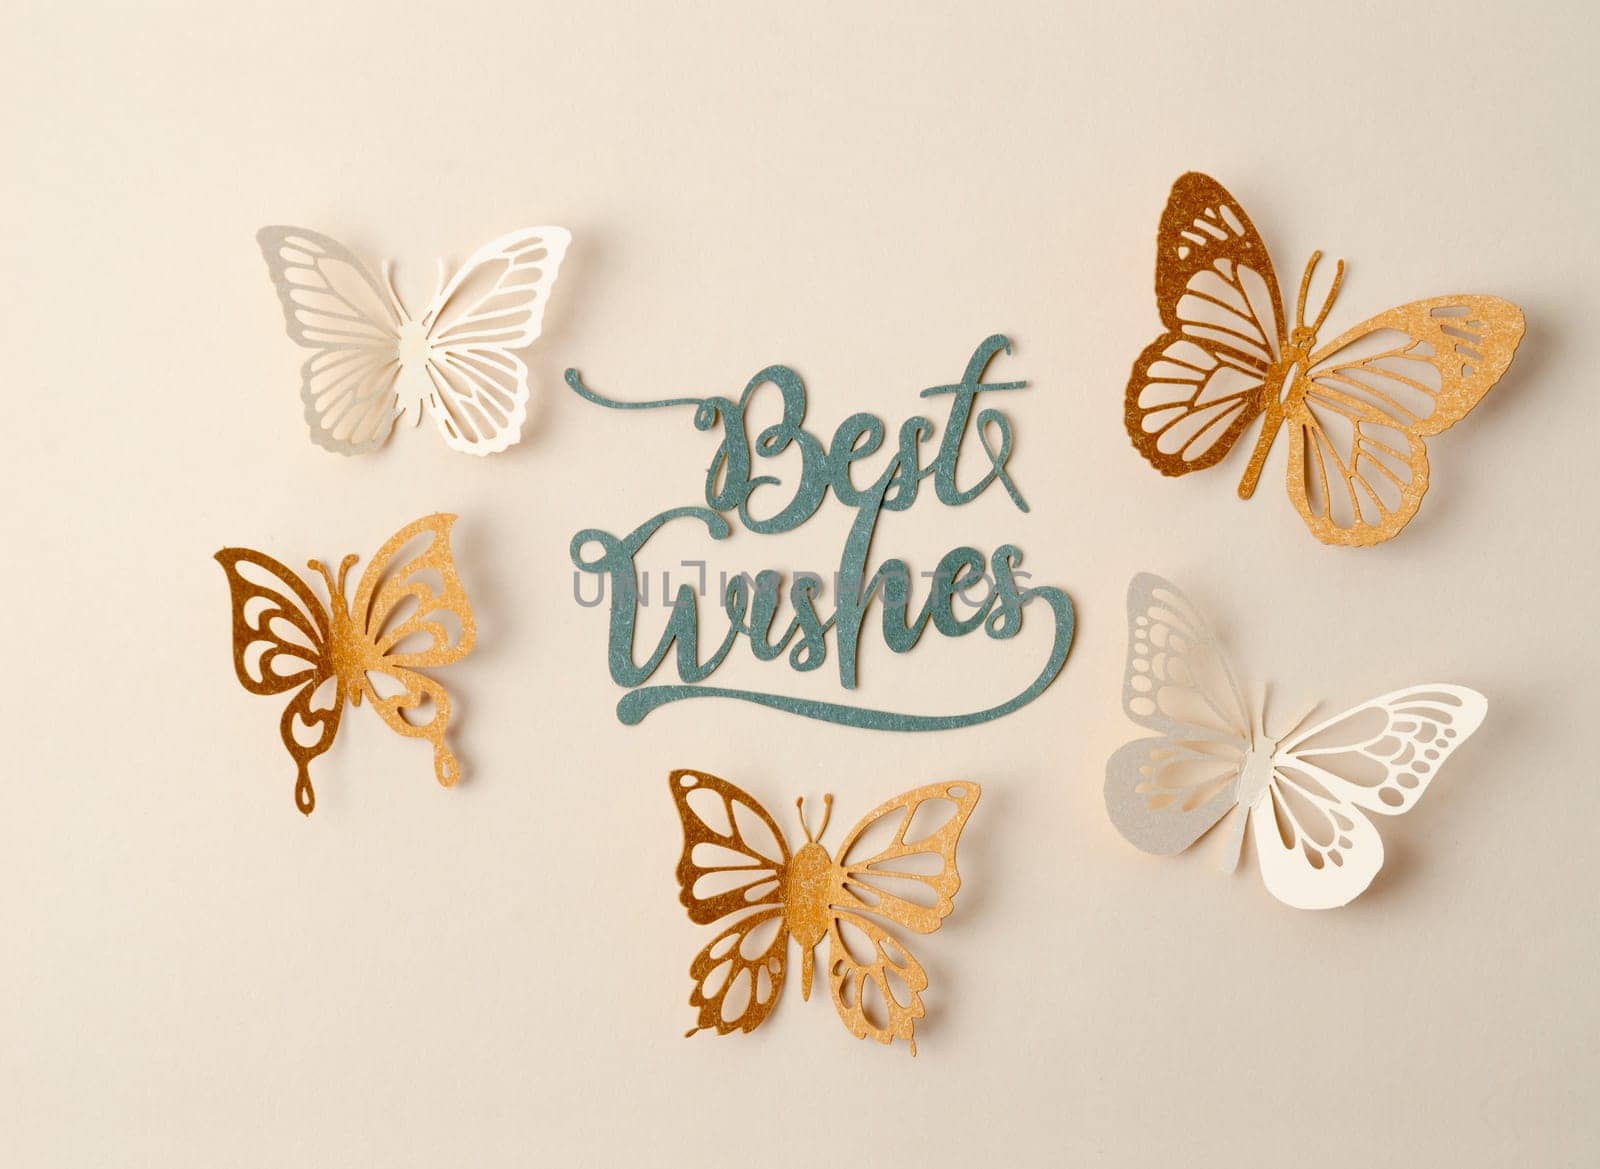 Bests Wishes text with butterfly paper carve on pastel background.